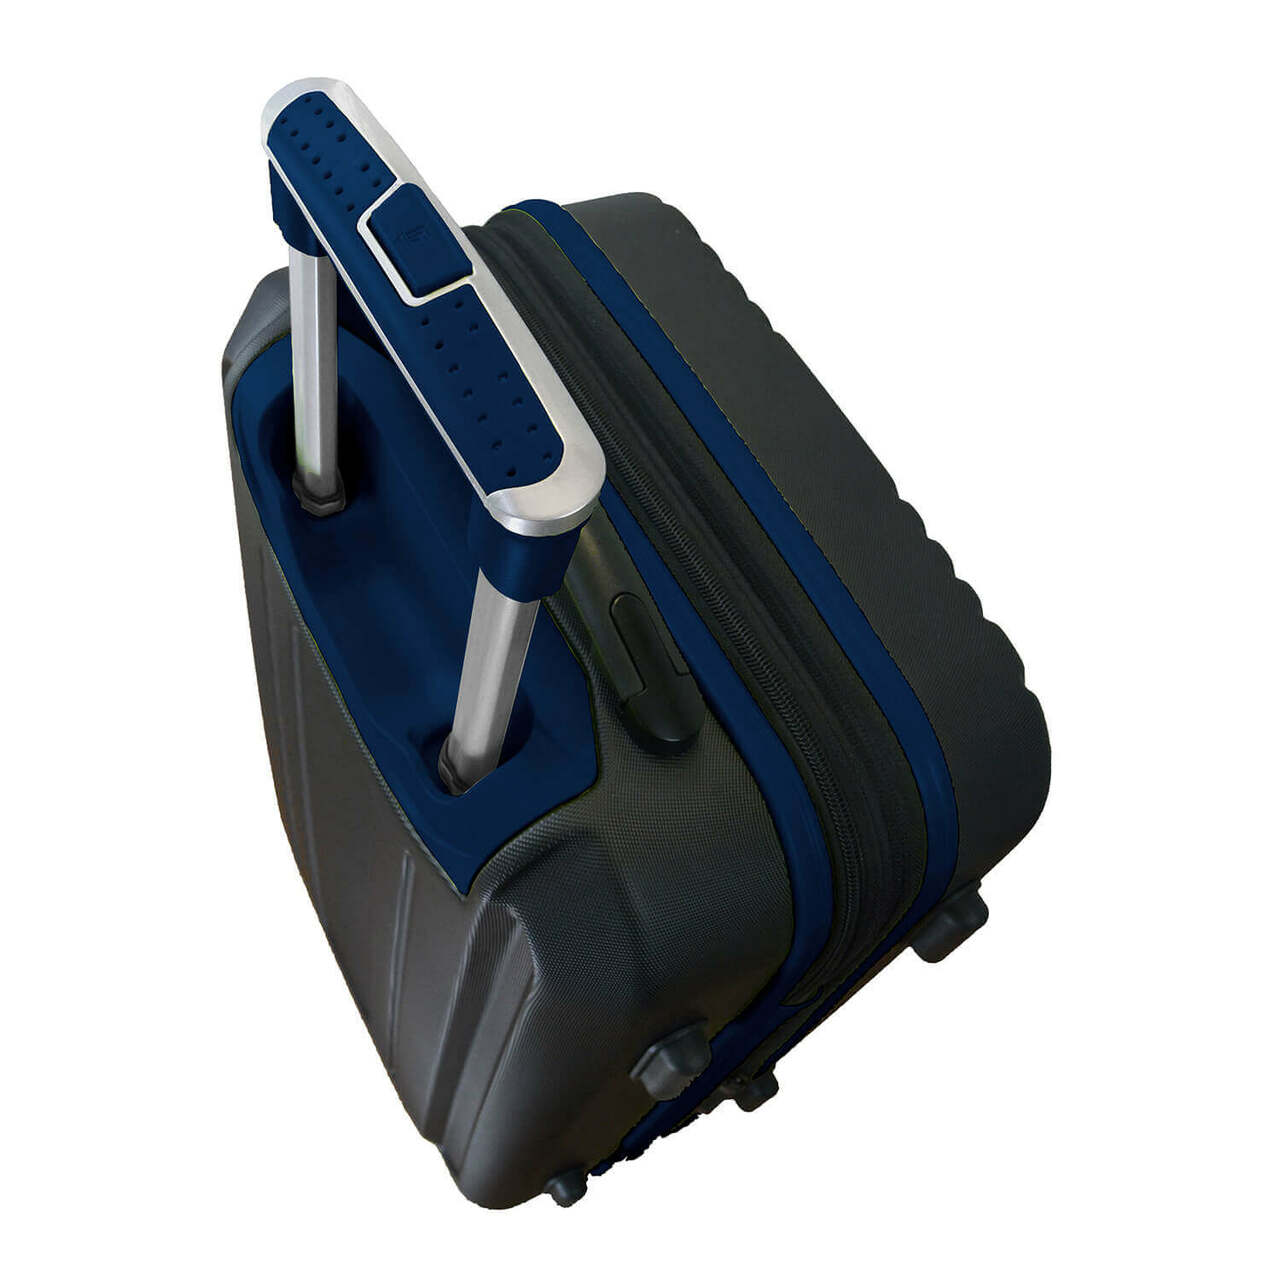 Lightning Carry On Spinner Luggage | Tampa Bay Lightning Hardcase Two-Tone Luggage Carry-on Spinner in Navy